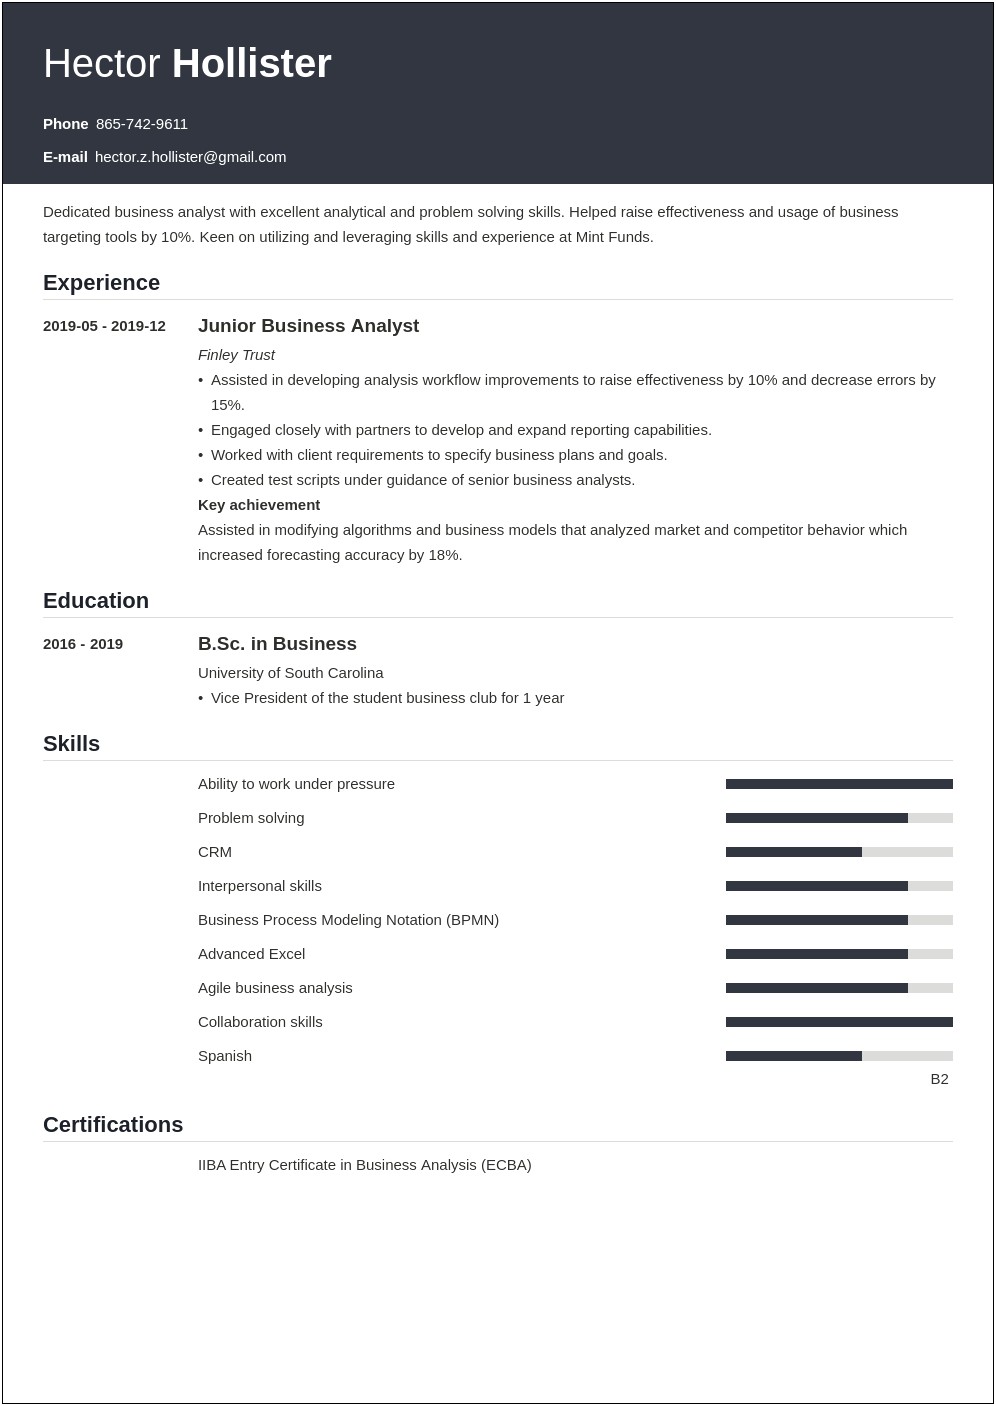 Web Services Business Analyst Sample Resume